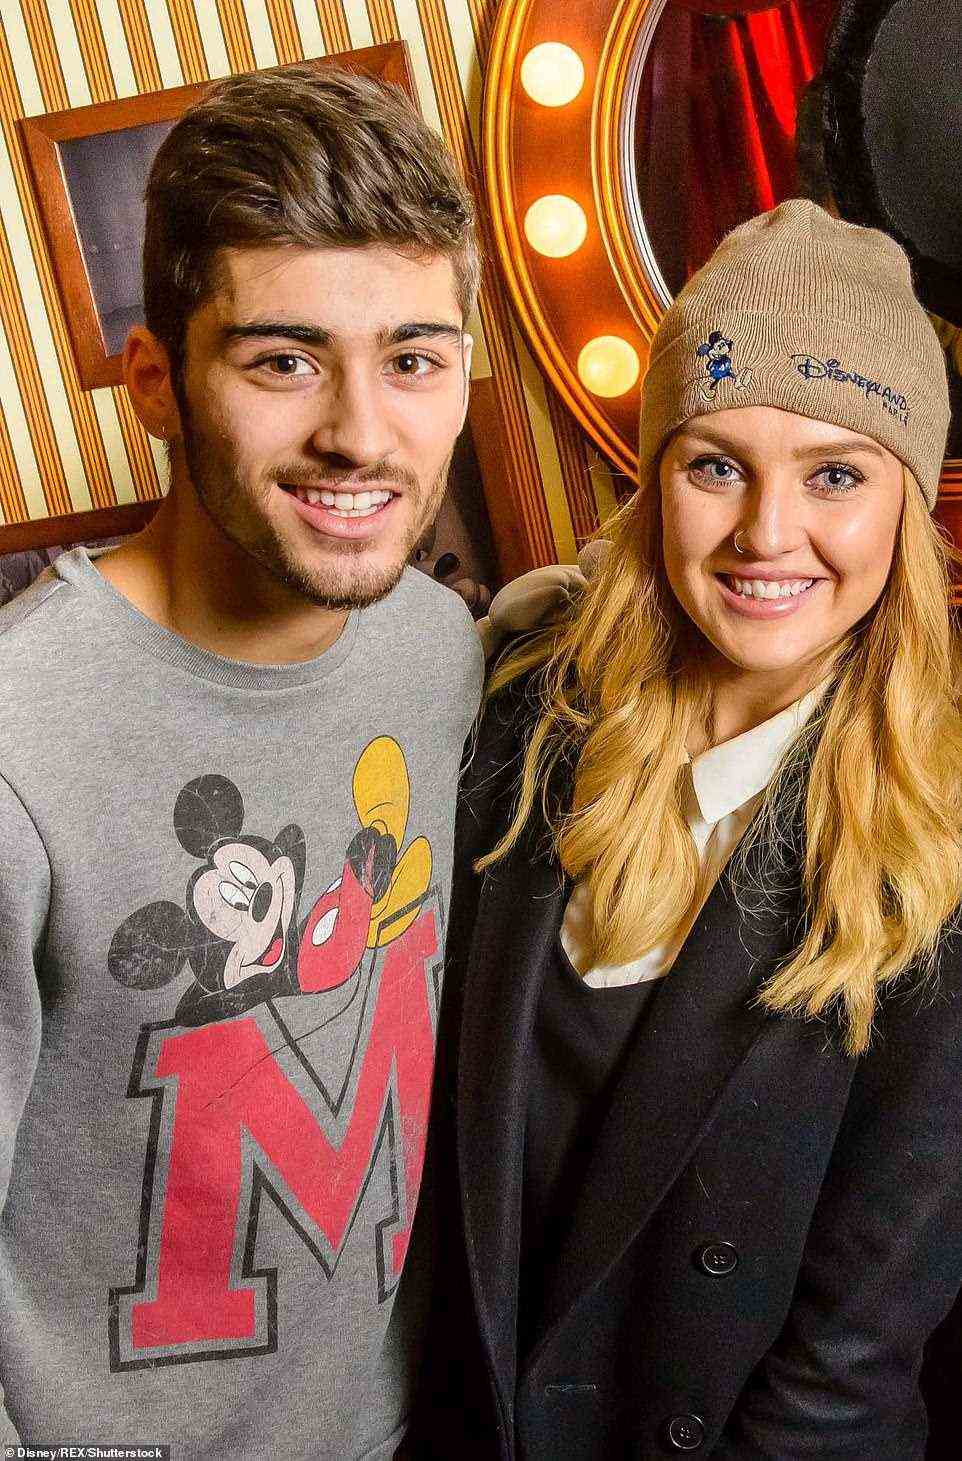 Old flame: Perrie started a relationship with One Direction's Zayn Malik in 2012 and the loved-up couple became engaged a year later (pictured in 2014)